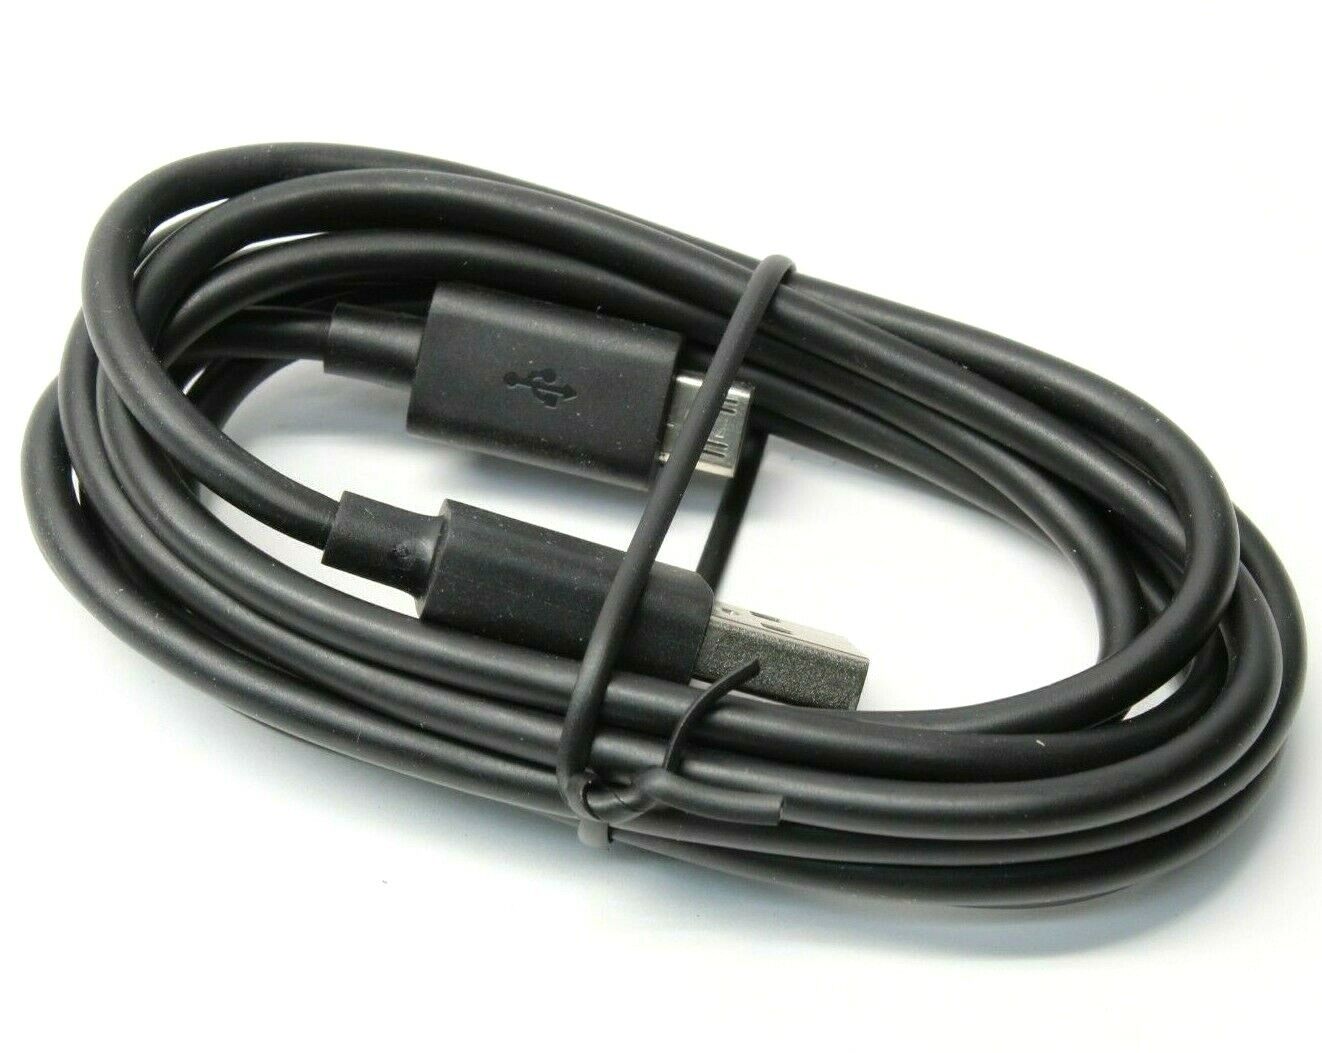 USB Power Cable Cord for Amazon Fire TV